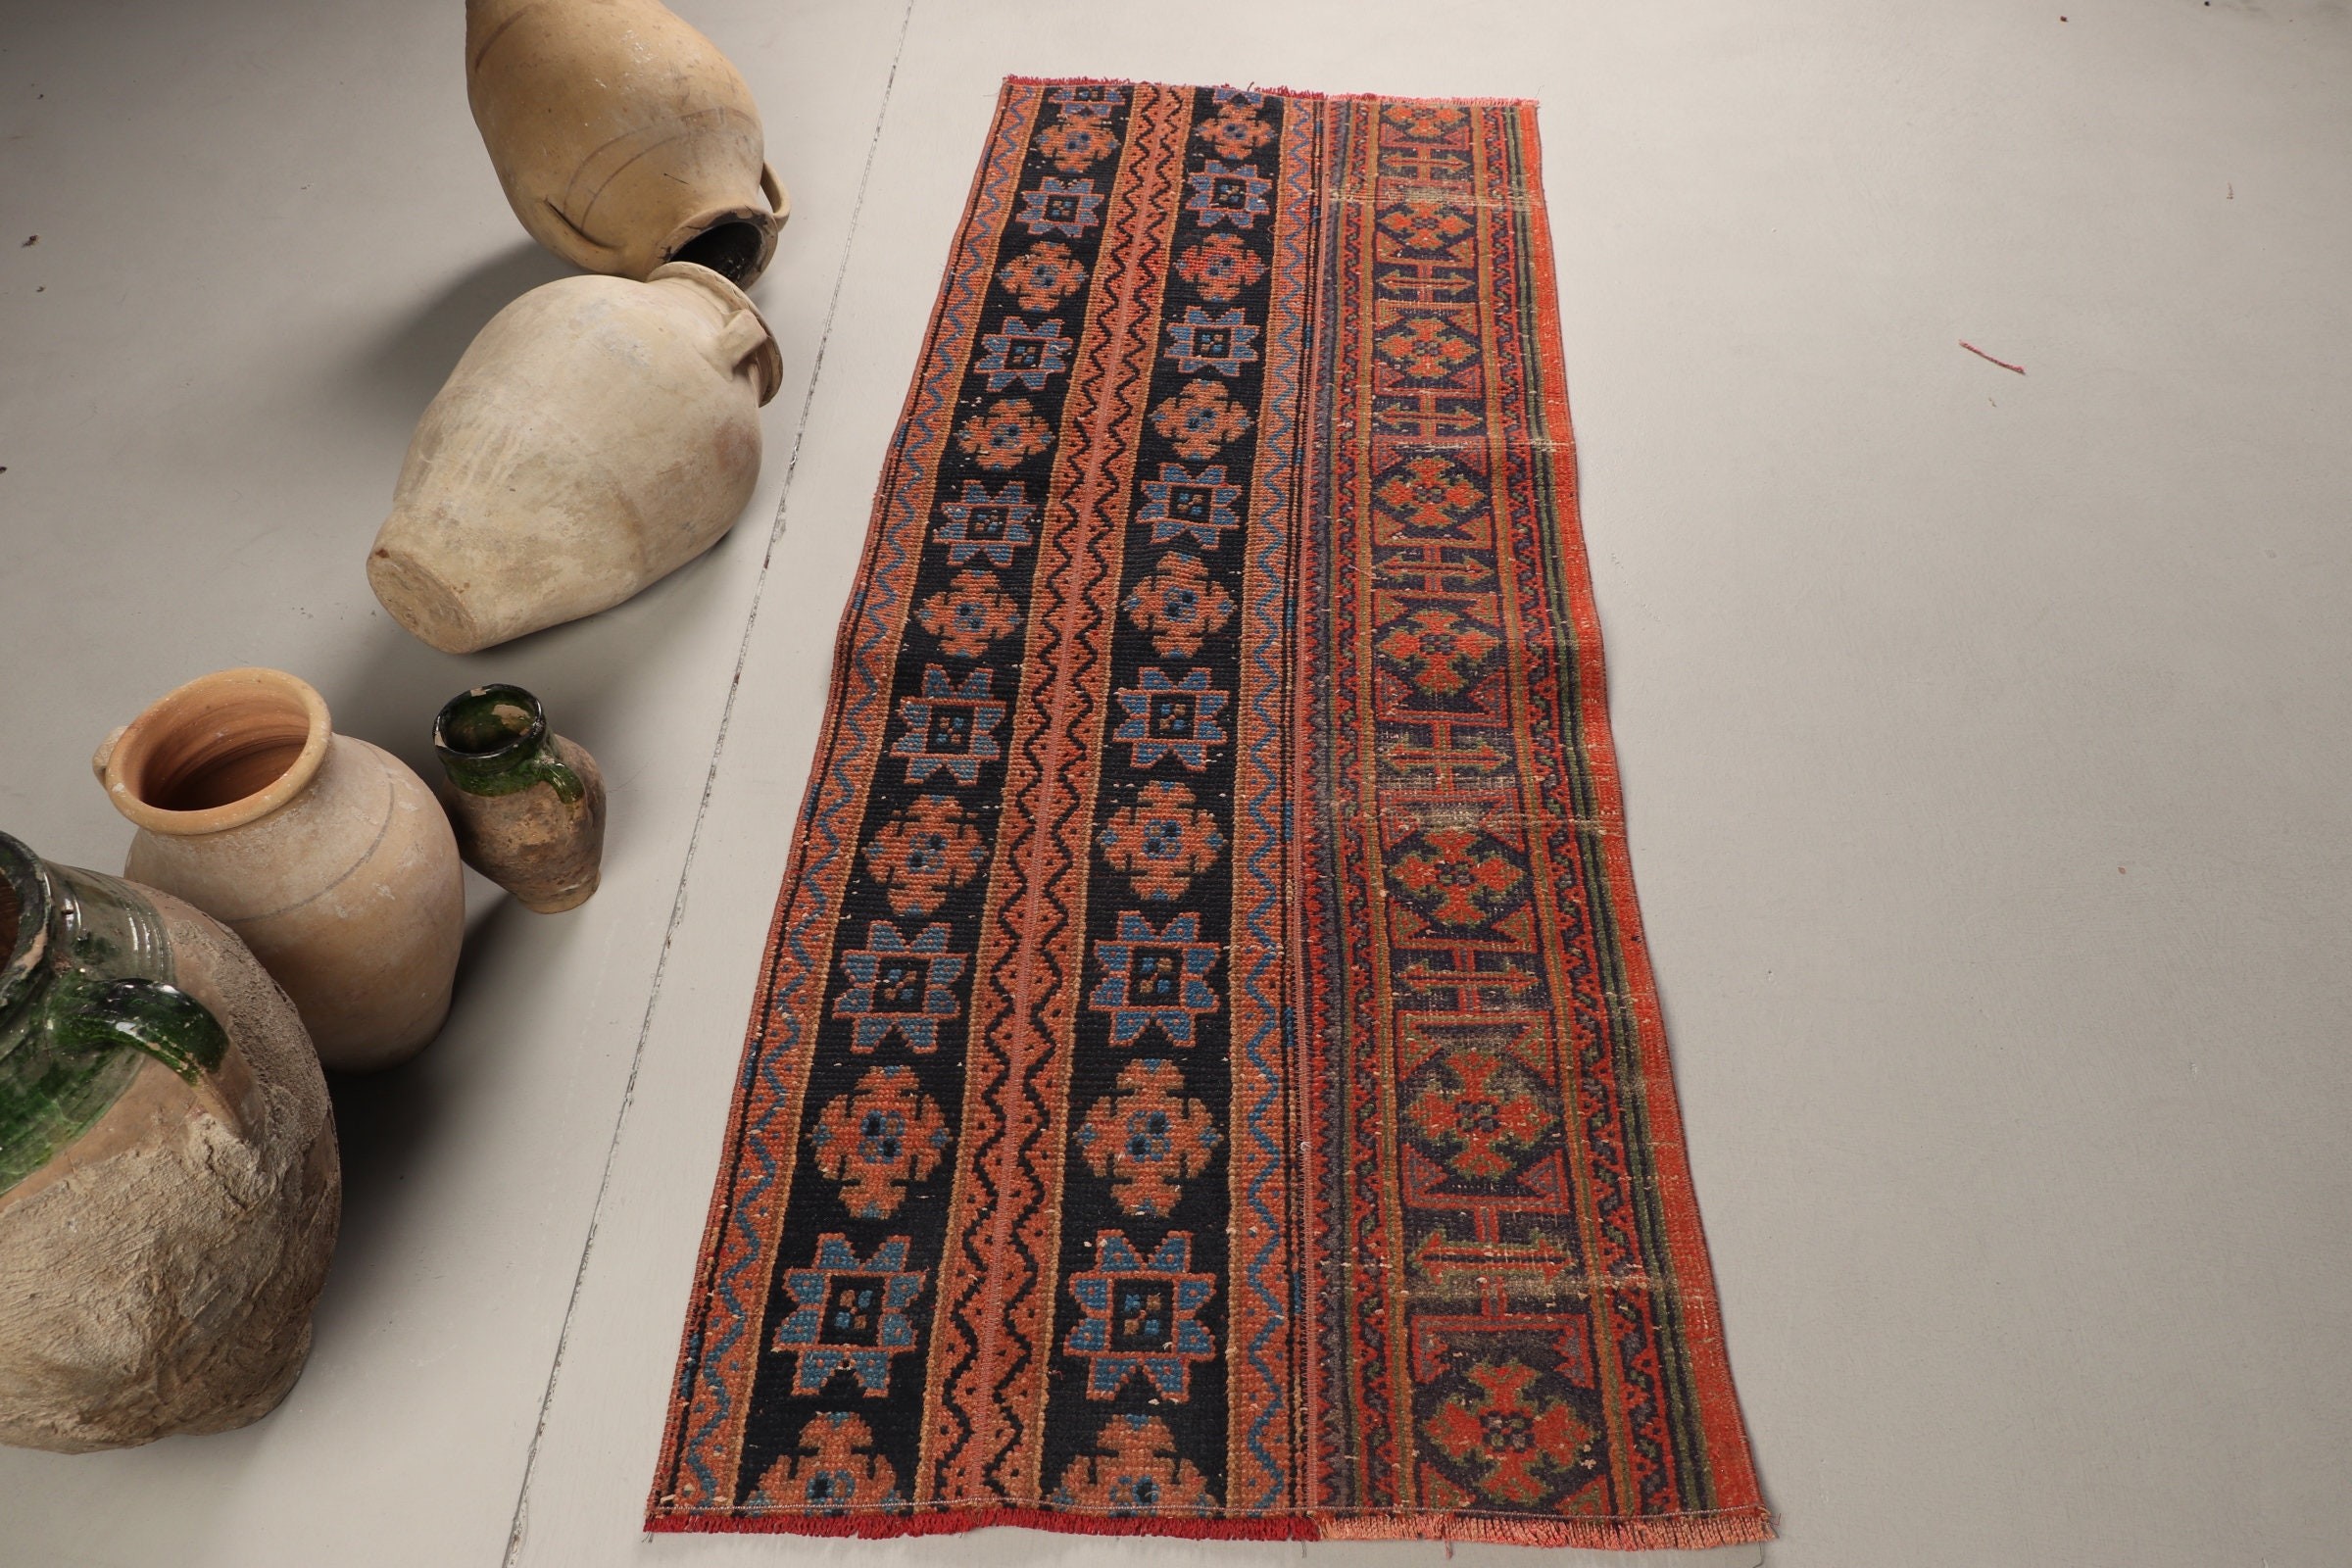 2.5x6.2 ft Accent Rug, Cool Rug, Turkish Rugs, Entry Rug, Kitchen Rugs, Blue Bedroom Rug, Rugs for Kitchen, Vintage Rugs